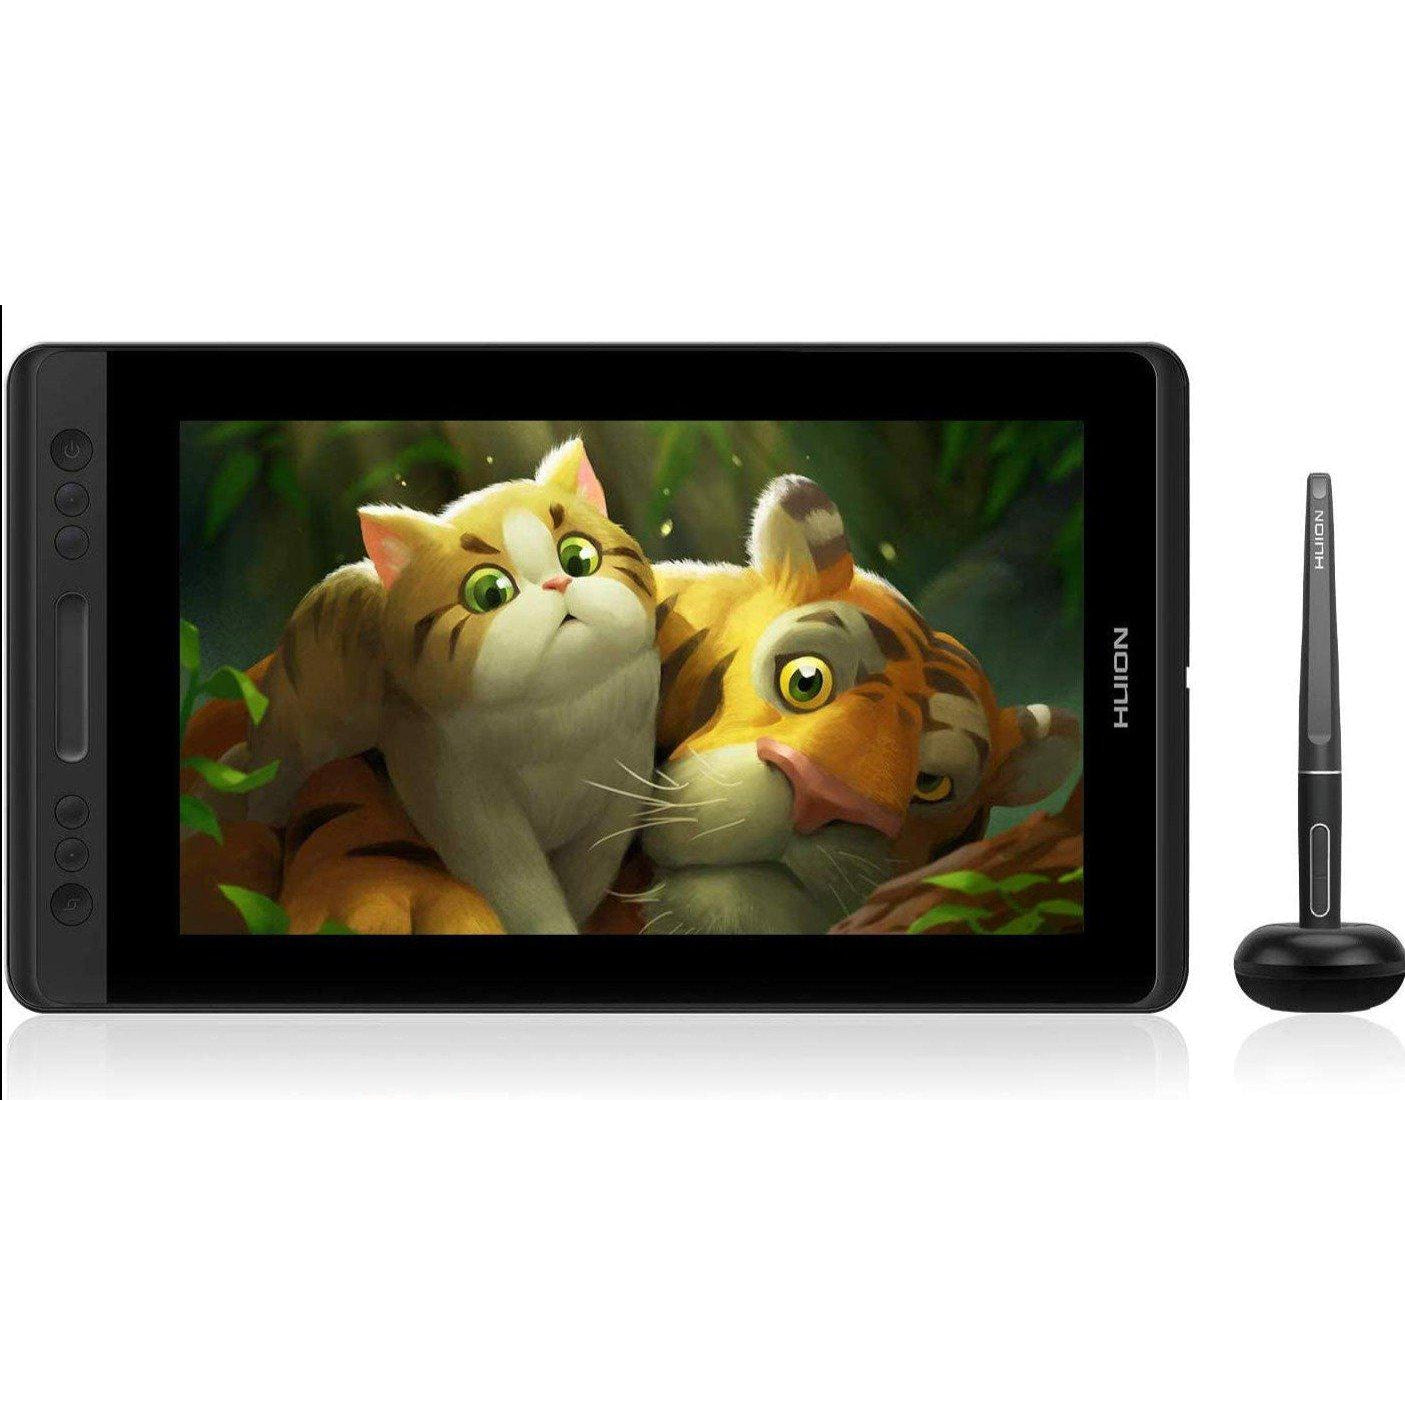 Huion Kamvas Pro 13 Full HD 13.3 inch Graphics Tablet Monitor with Battery-free for On Screen Sketching and Drawing